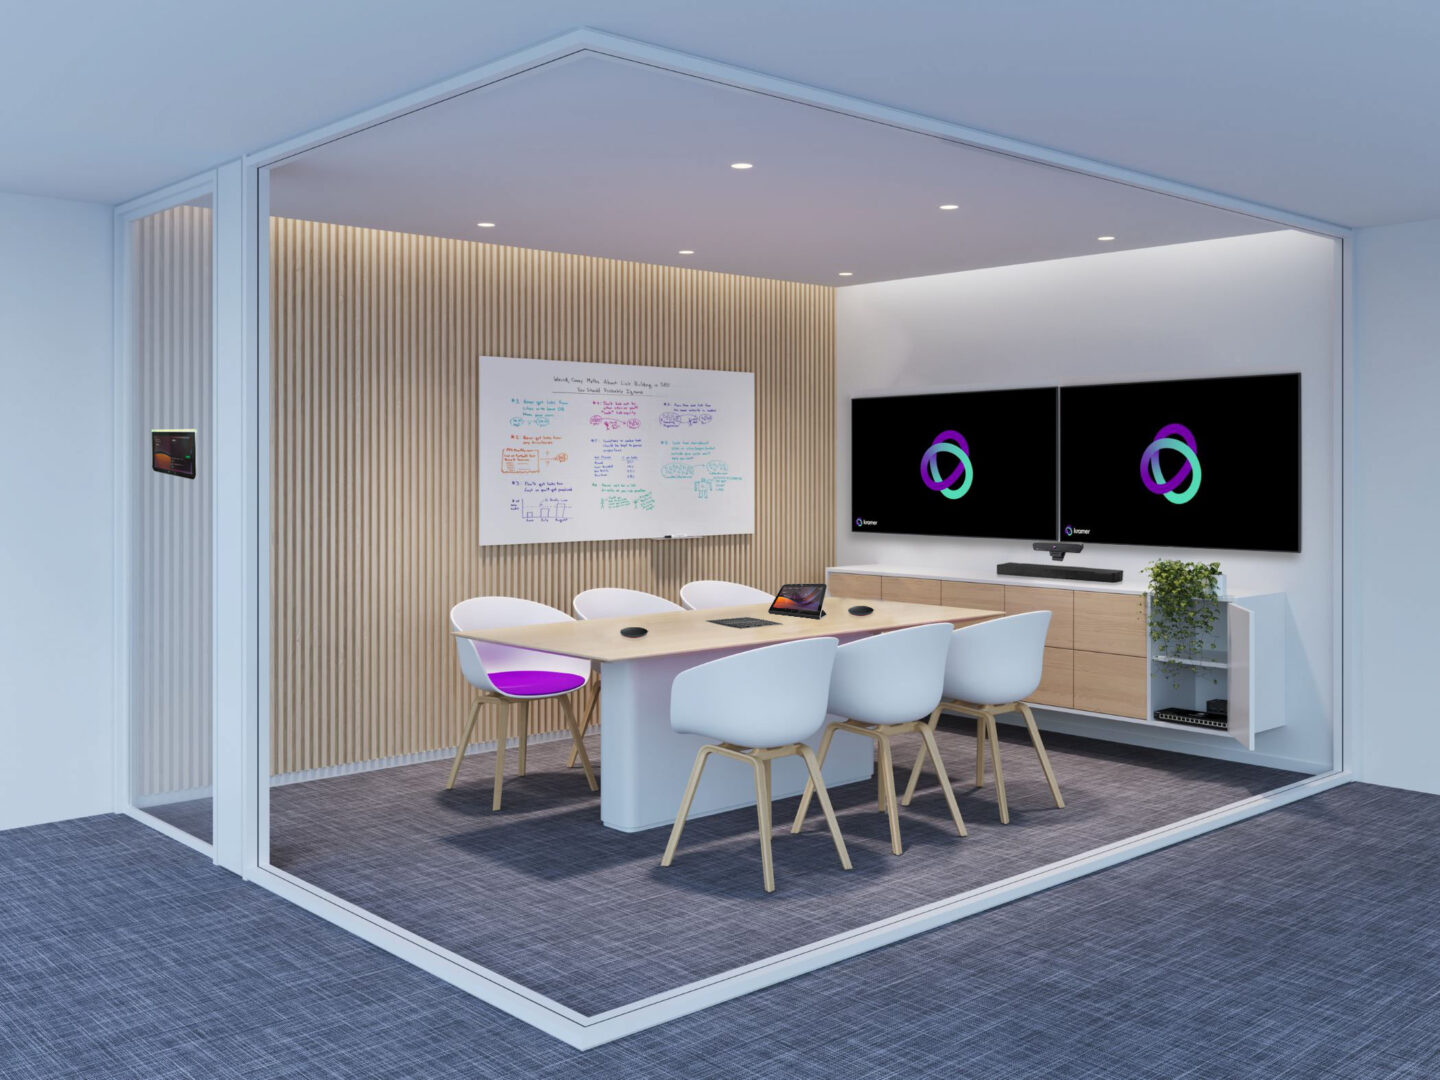 A medium meeting room, with MTR solutions for Medium Meeting Rooms